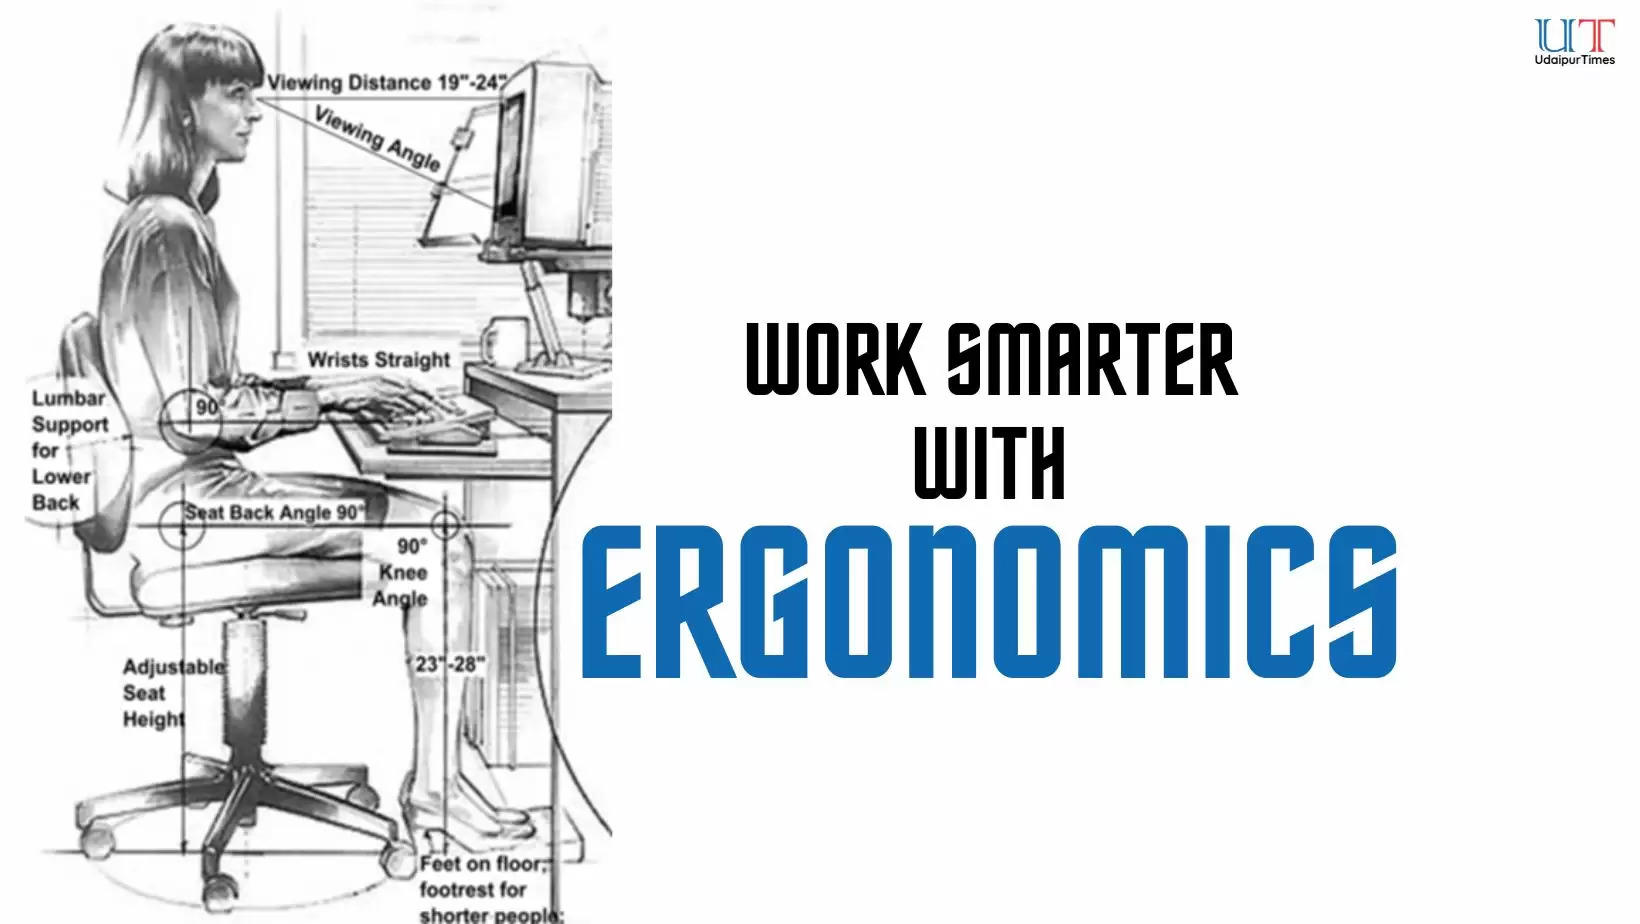 What is Ergonomics? Let's start with the basics. Ergonomics is all about designing our environment to fit us ie the Worker, rather than forcing our bodies to fit the environment. It's about finding the best possible match between people, the things they do, the objects they use, and the environments they work and play in.